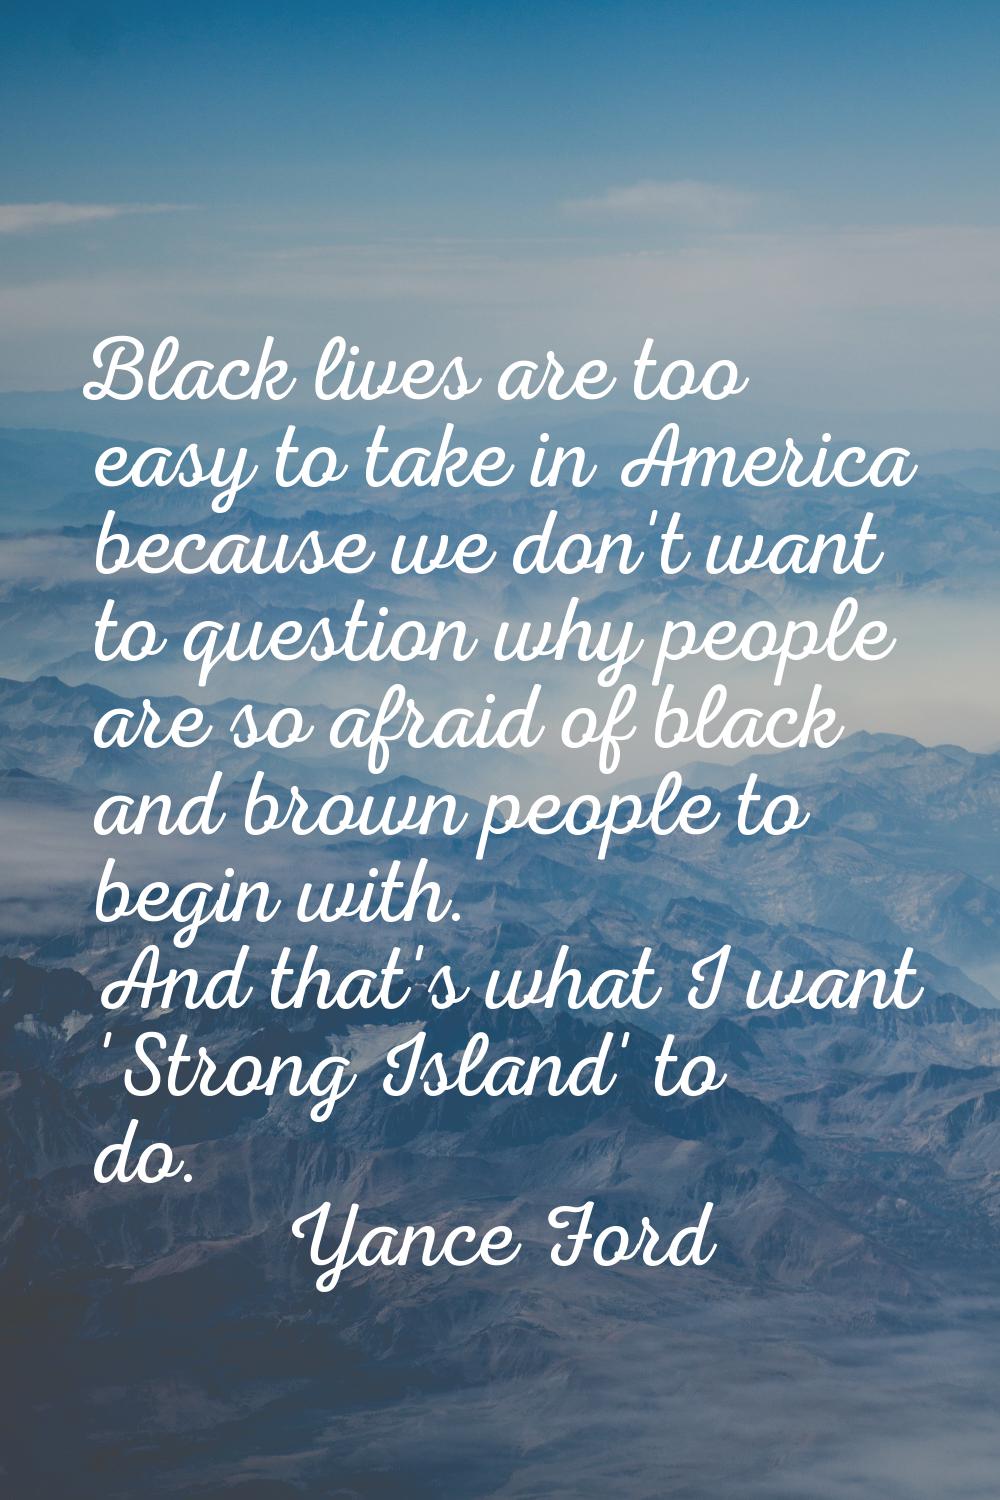 Black lives are too easy to take in America because we don't want to question why people are so afr